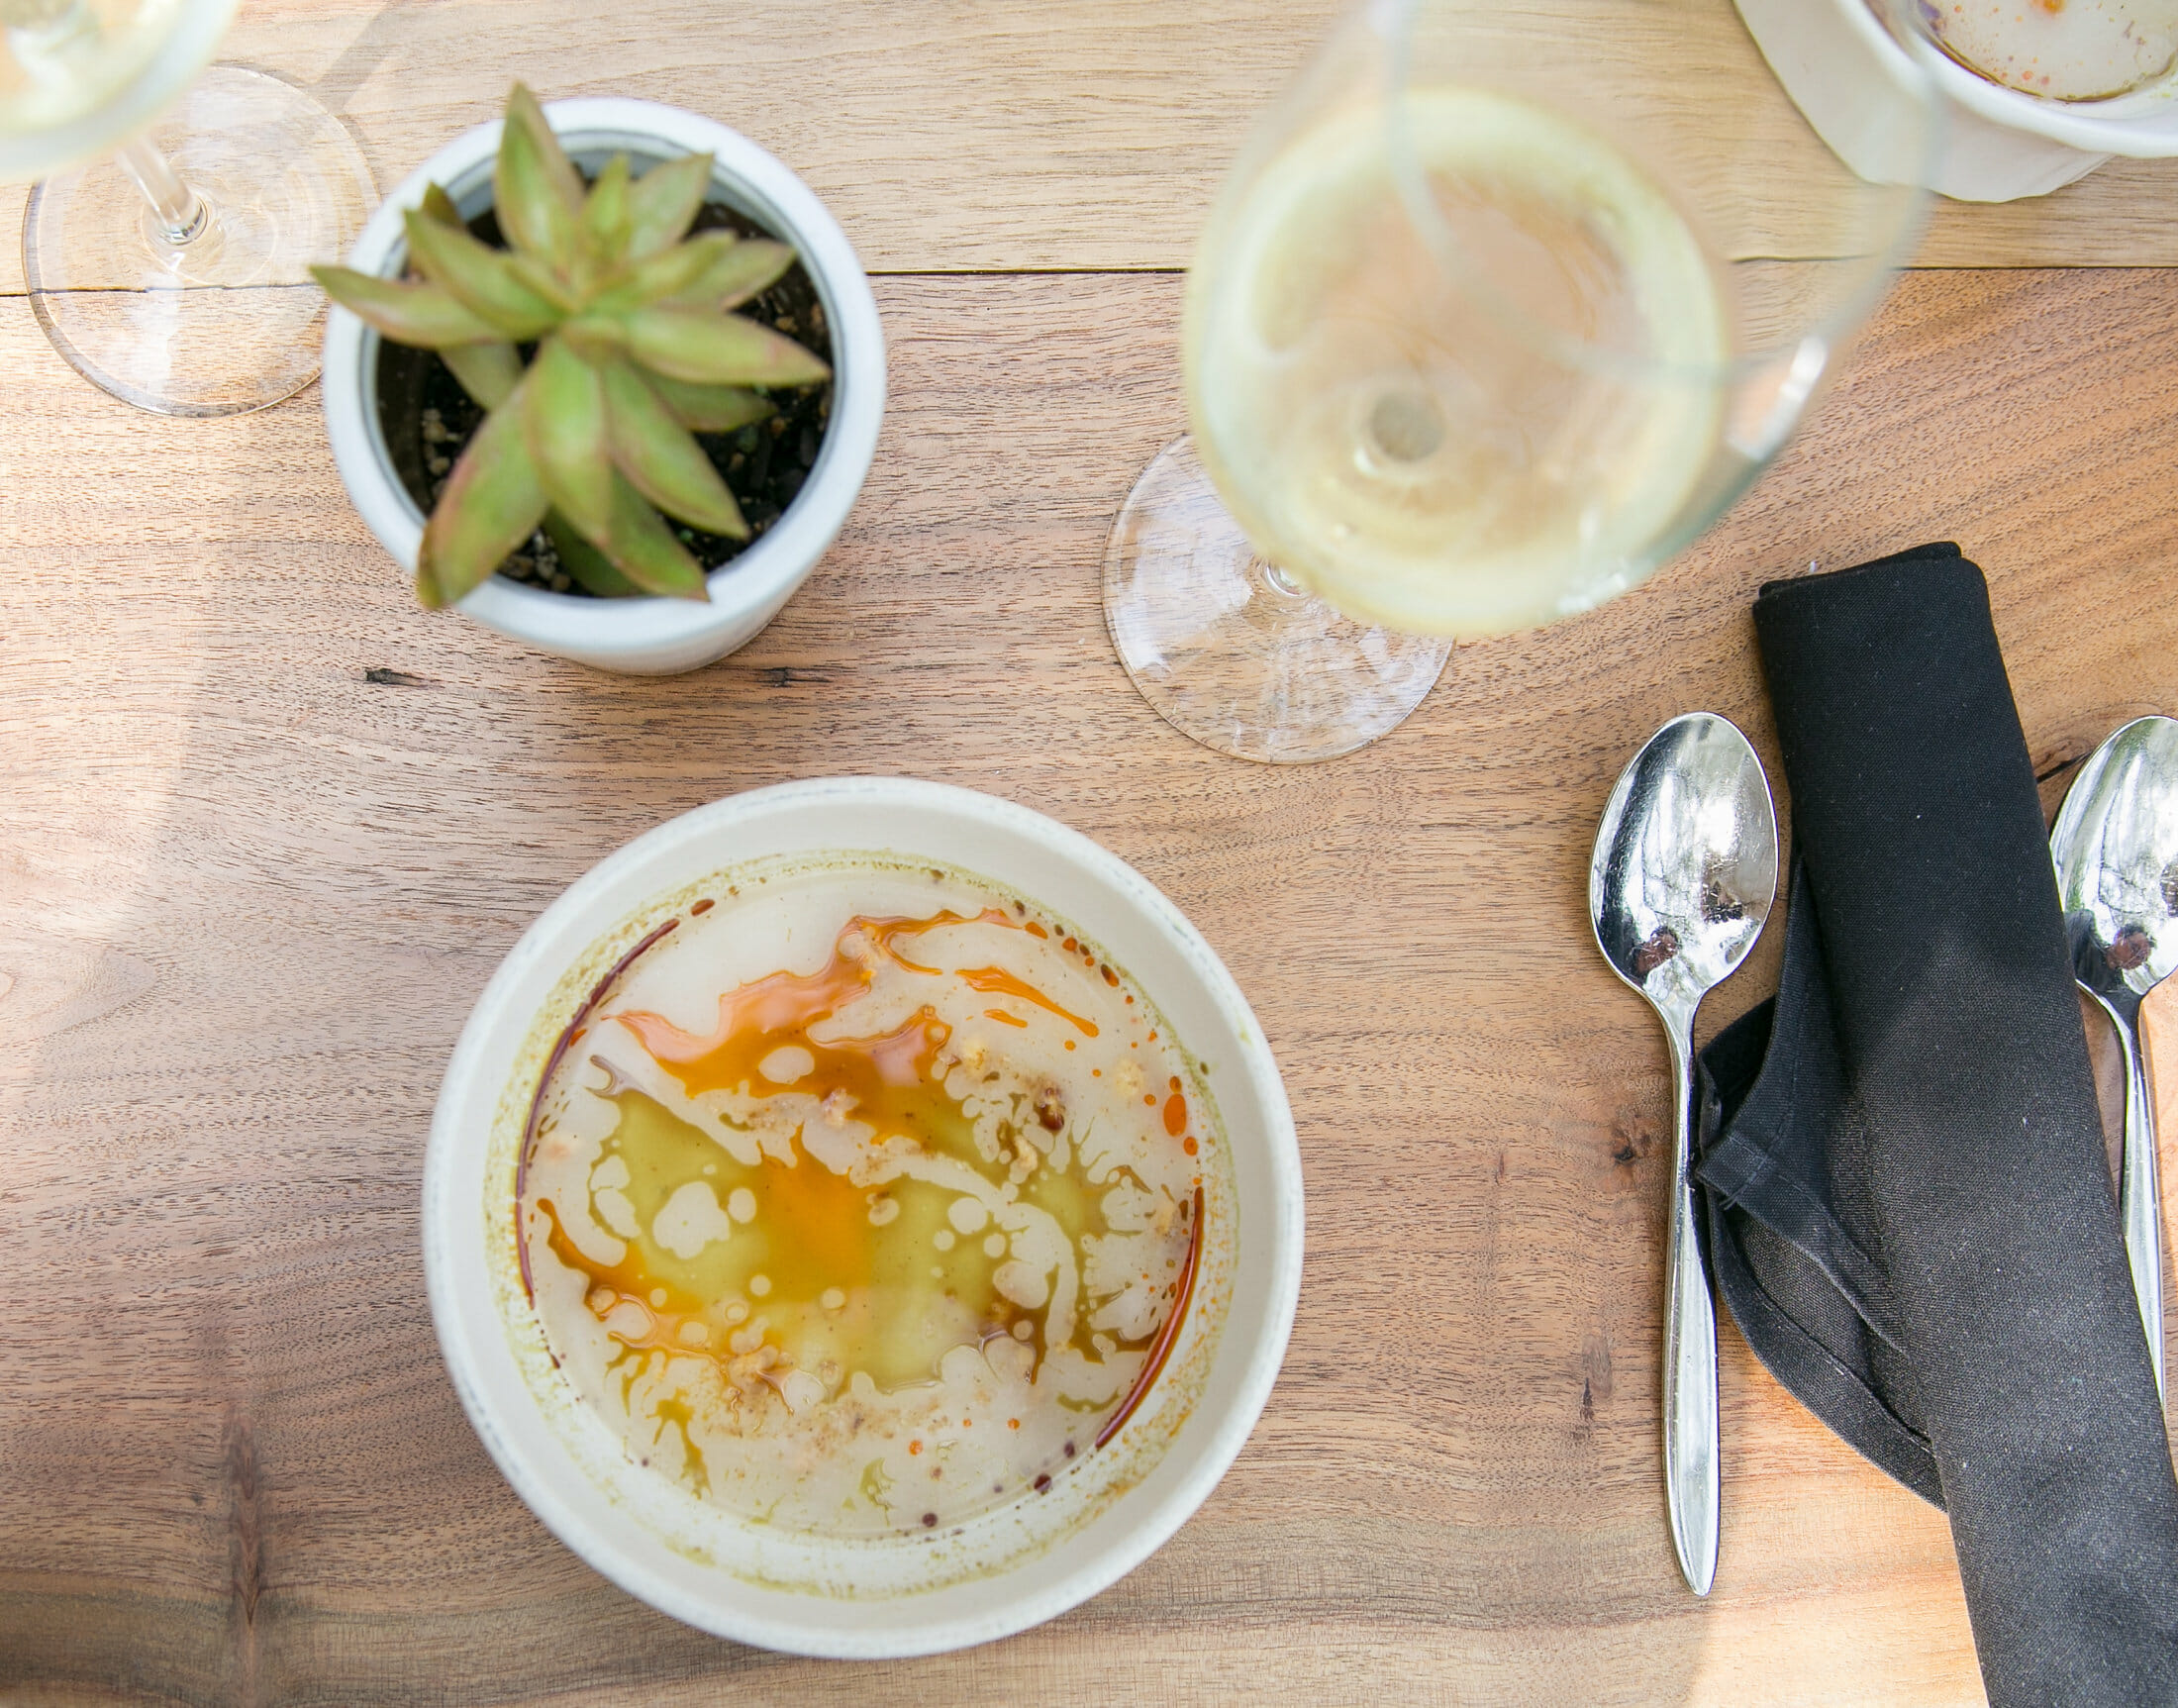 wine taste about plant food + wine: Our Favorite Places To Eat In Venice